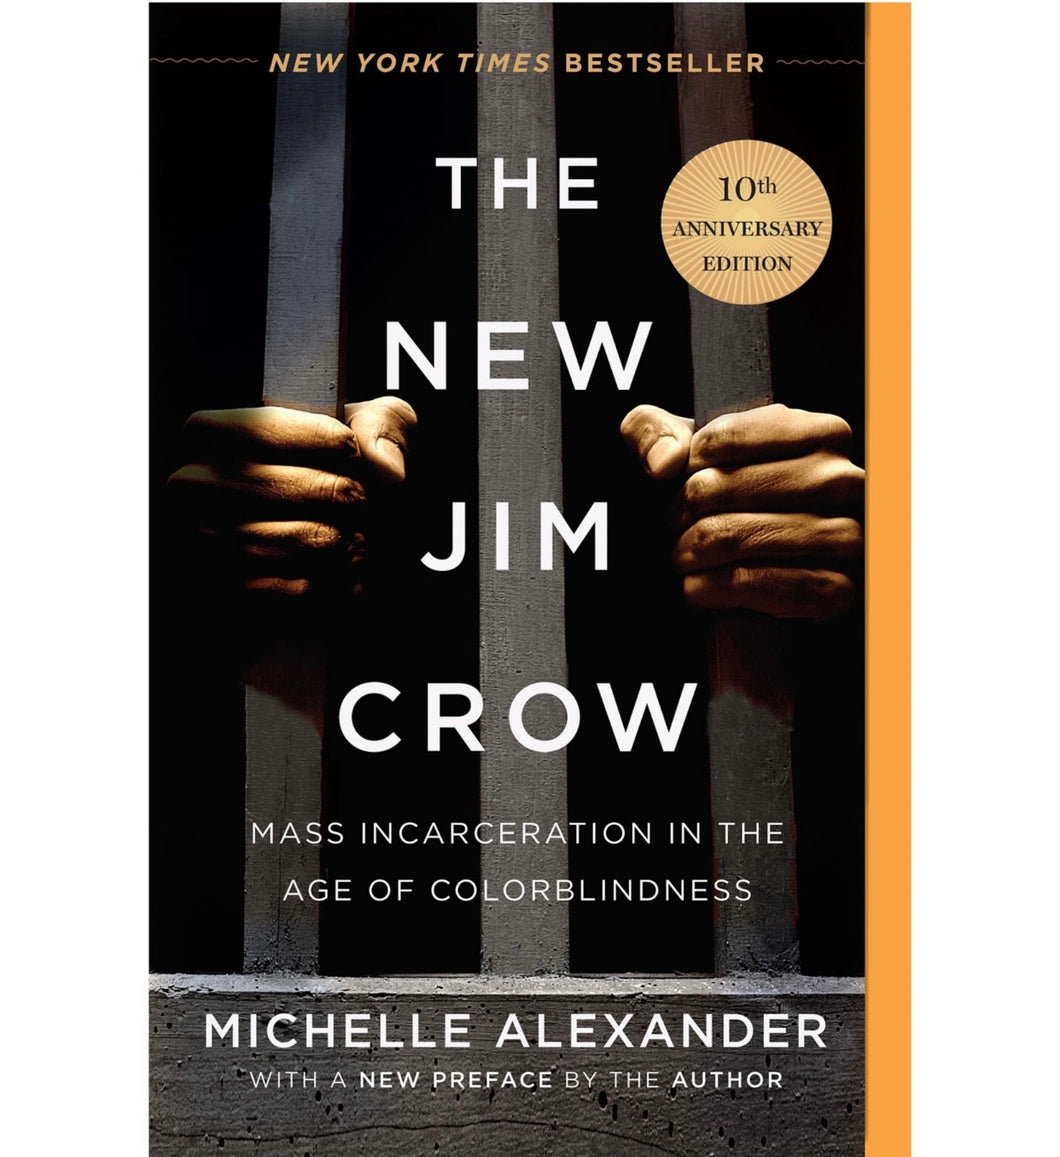 The New Jim Crow: Mass Incarceration in the Age of Colorblindness is a book by Michelle Alexander